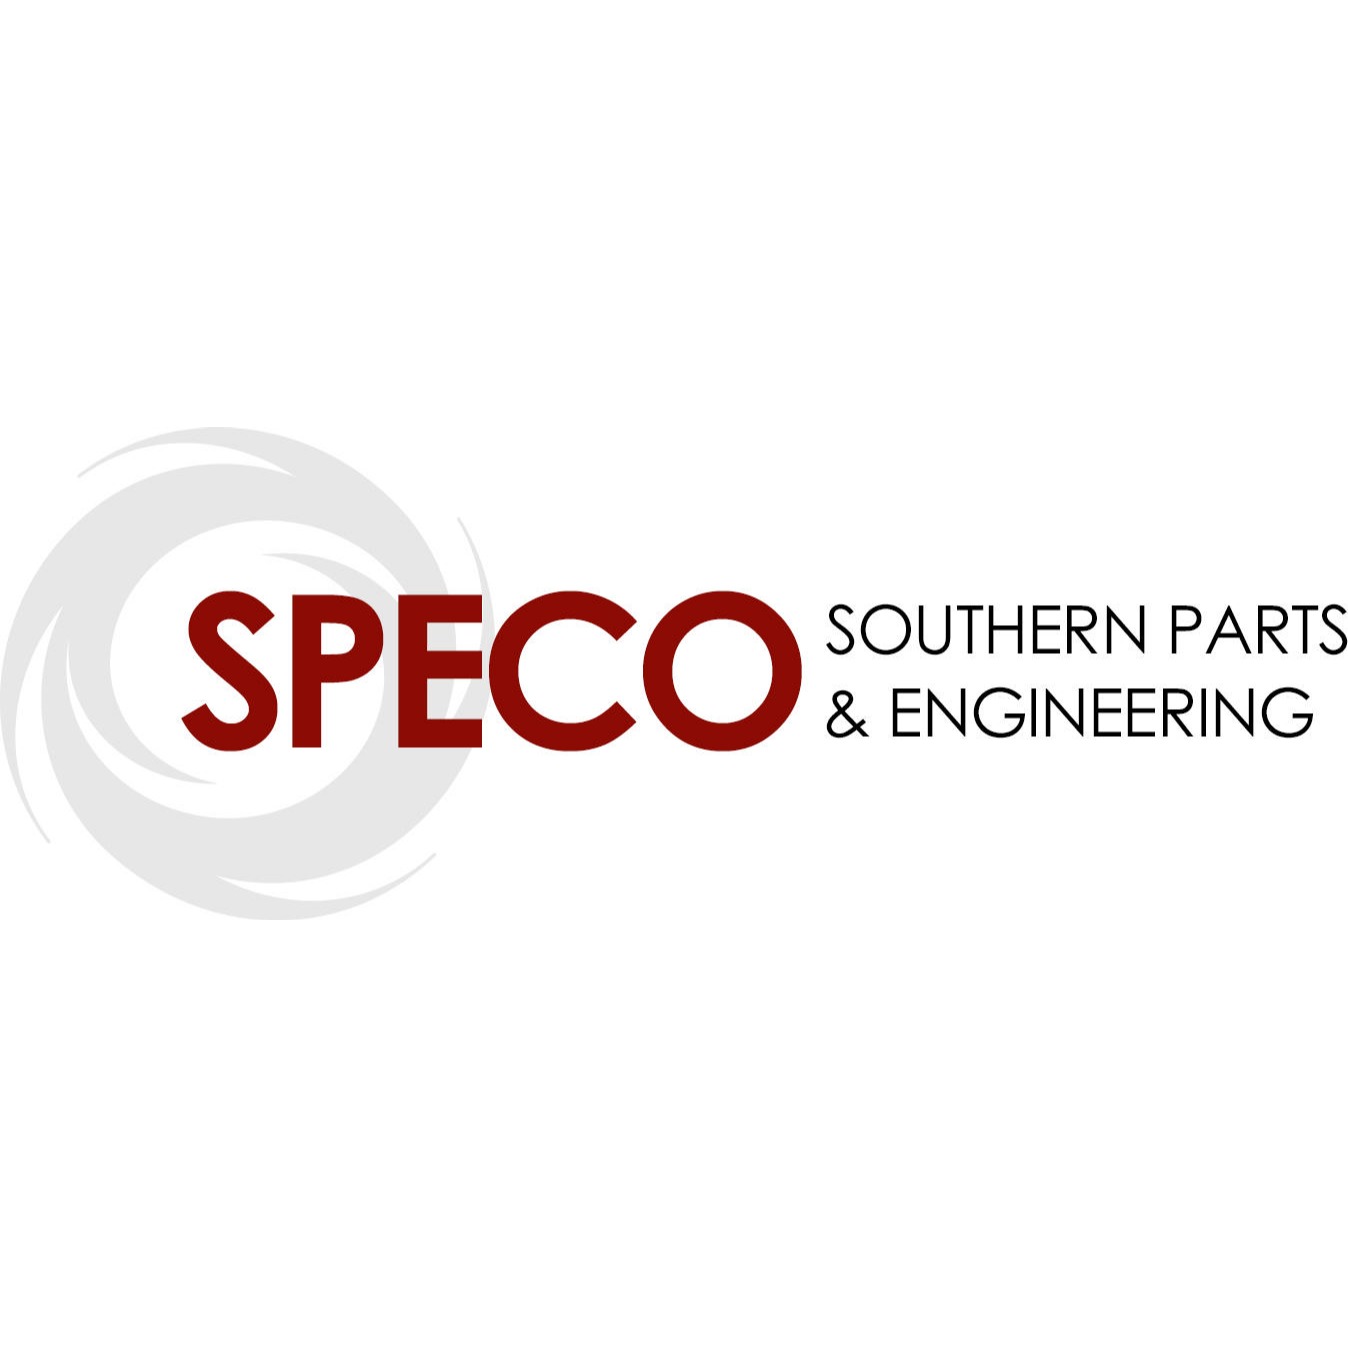 Southern Parts & Engineering Co